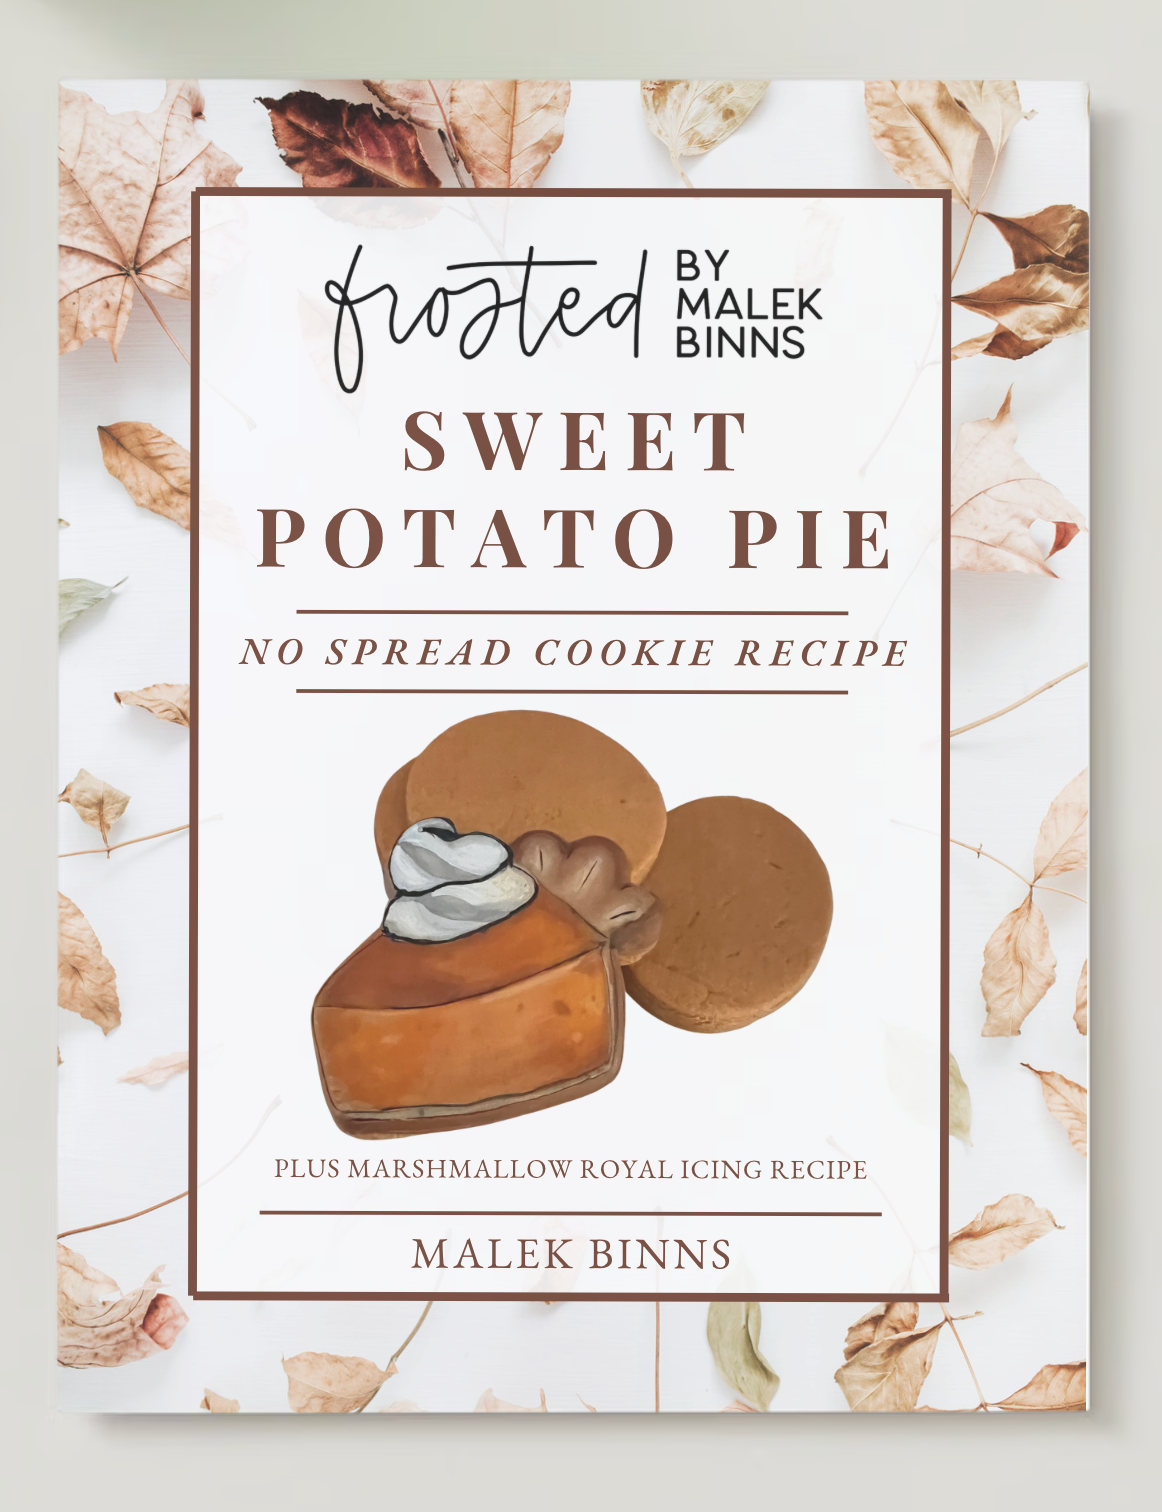 Sweet Potato Pie No Spread Cookie Recipe with Marshmallow Royal Icing